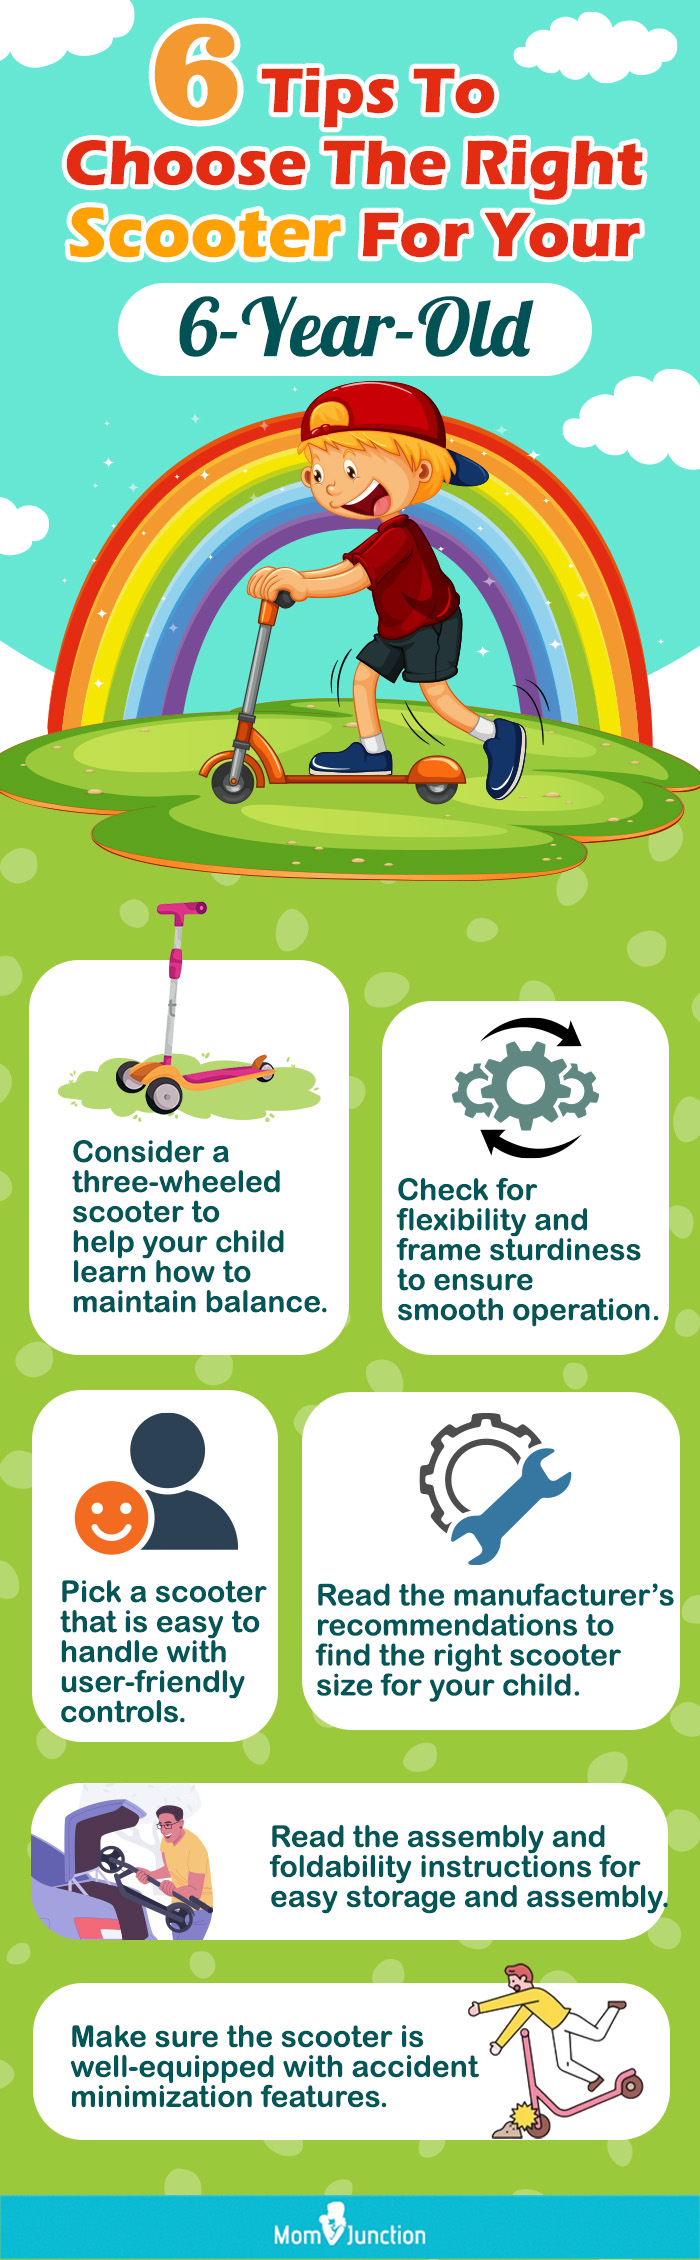 6 Tips To Choose The Right Scooter For Your 6-Year-Old